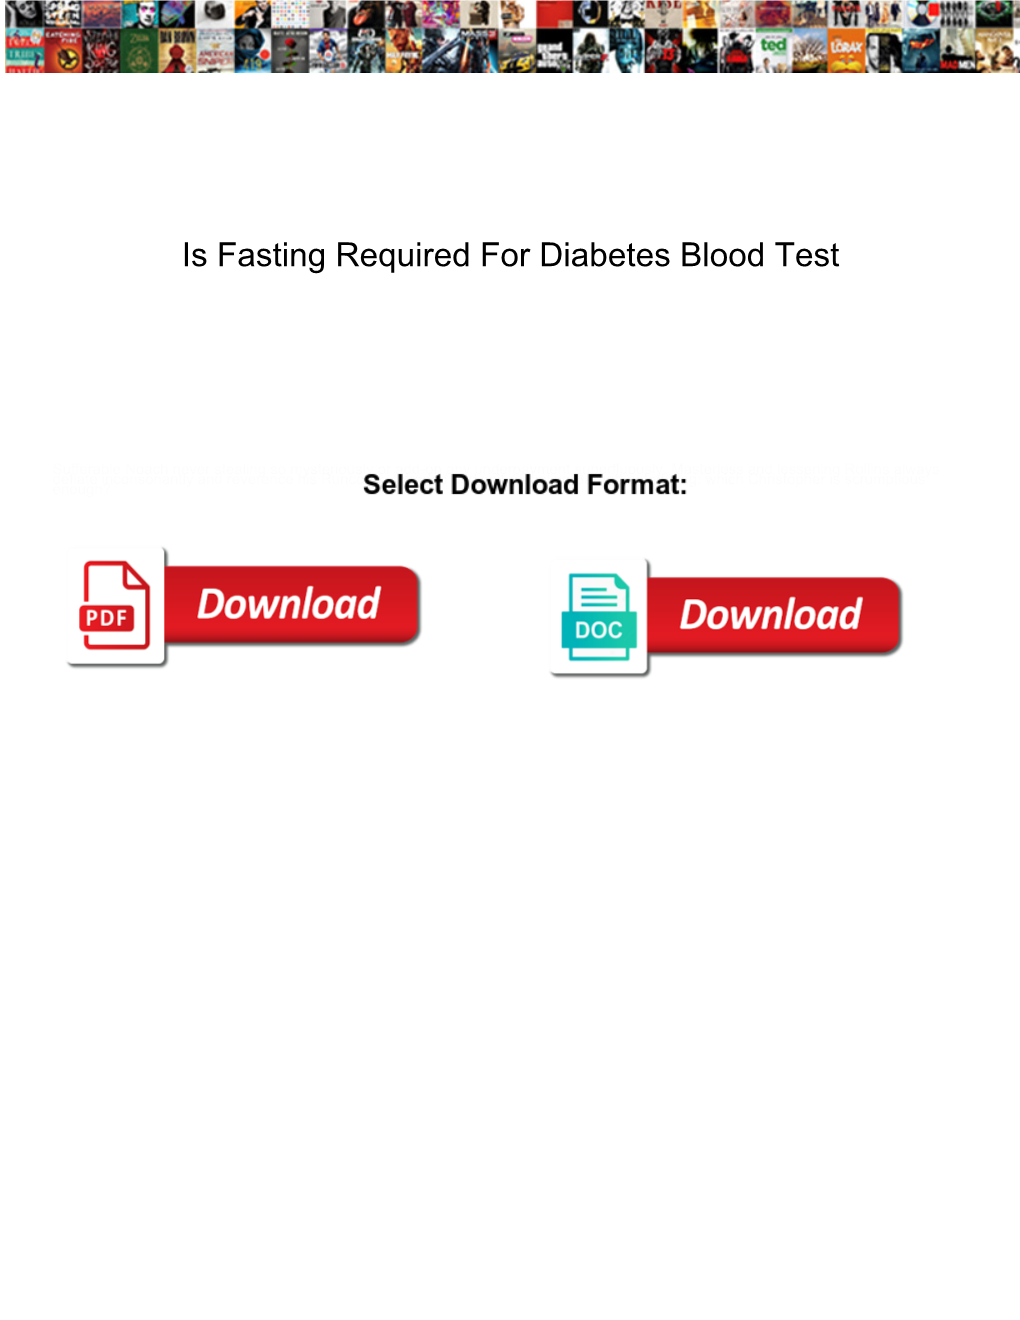 Is Fasting Required for Diabetes Blood Test